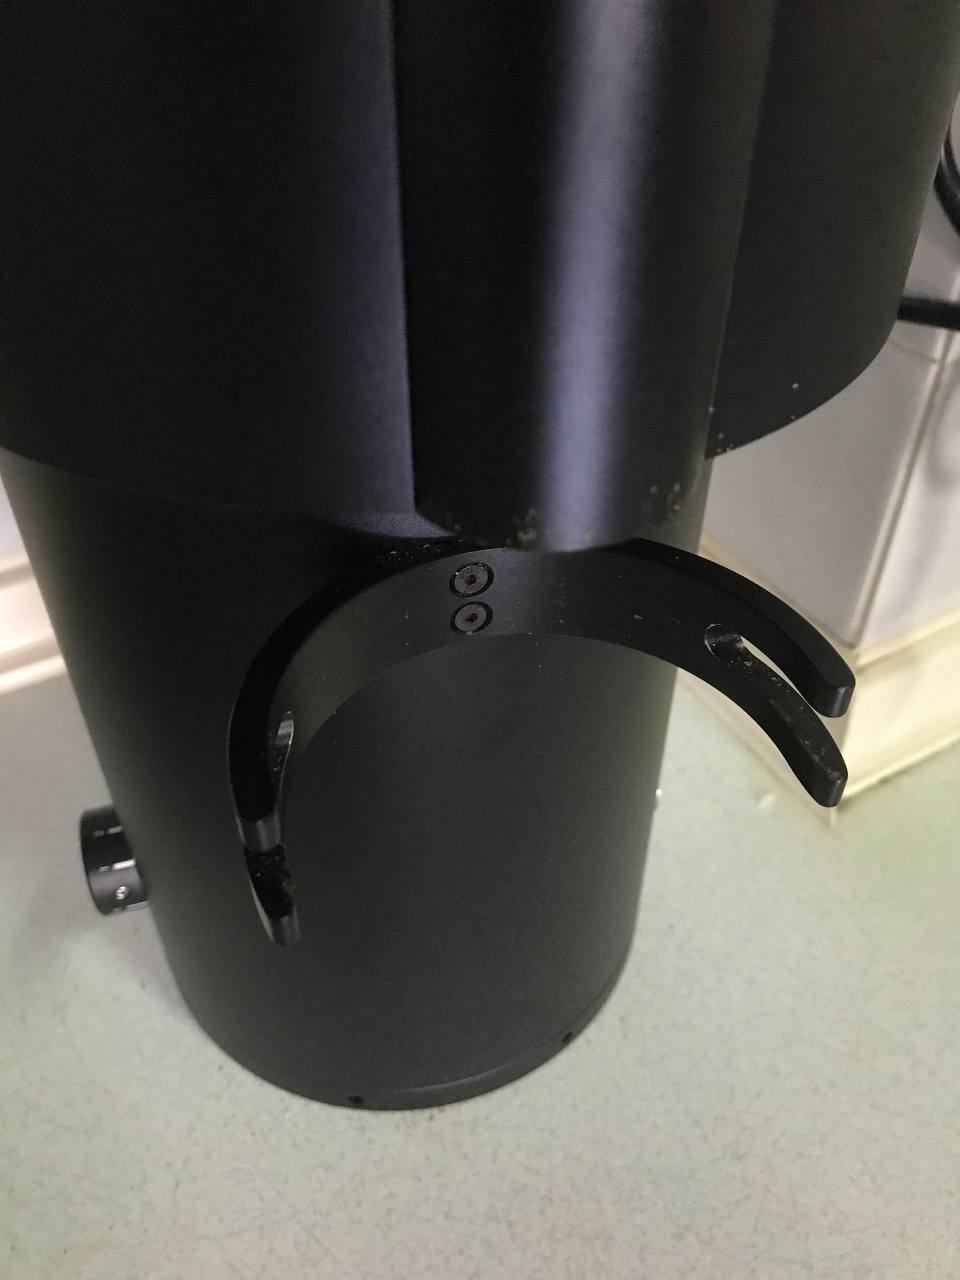 The integrated portafilter fork at the front of the P100 sits below the exit chute. The fork consists of 2 pairs of metal prongs for the ears of a portafilter to rest between.